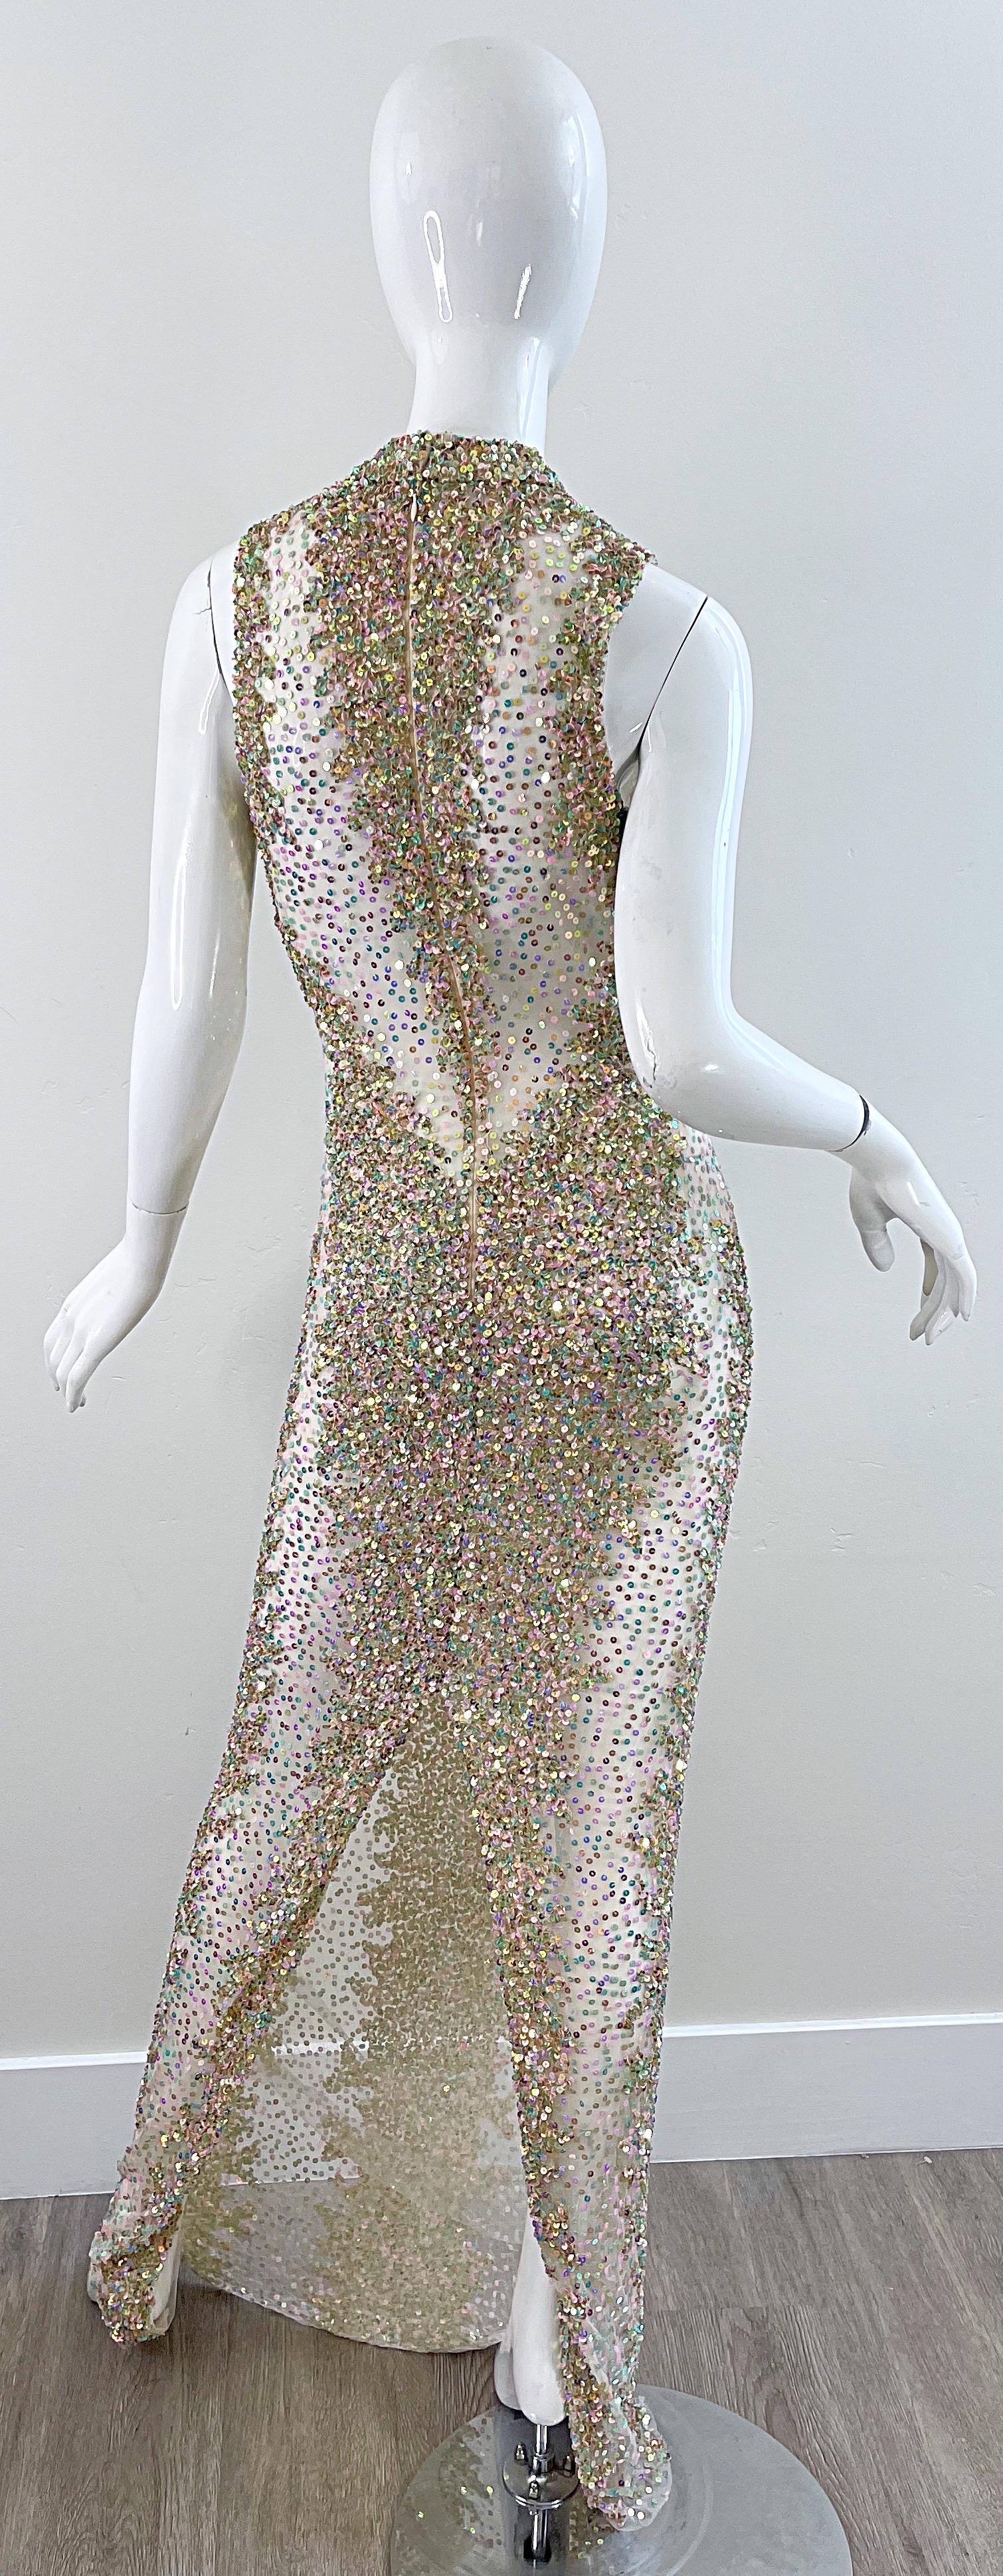 1990s Iridescent Sequined Sheer Sexy Mesh Vintage 90s Seductive Gown In Excellent Condition For Sale In San Diego, CA